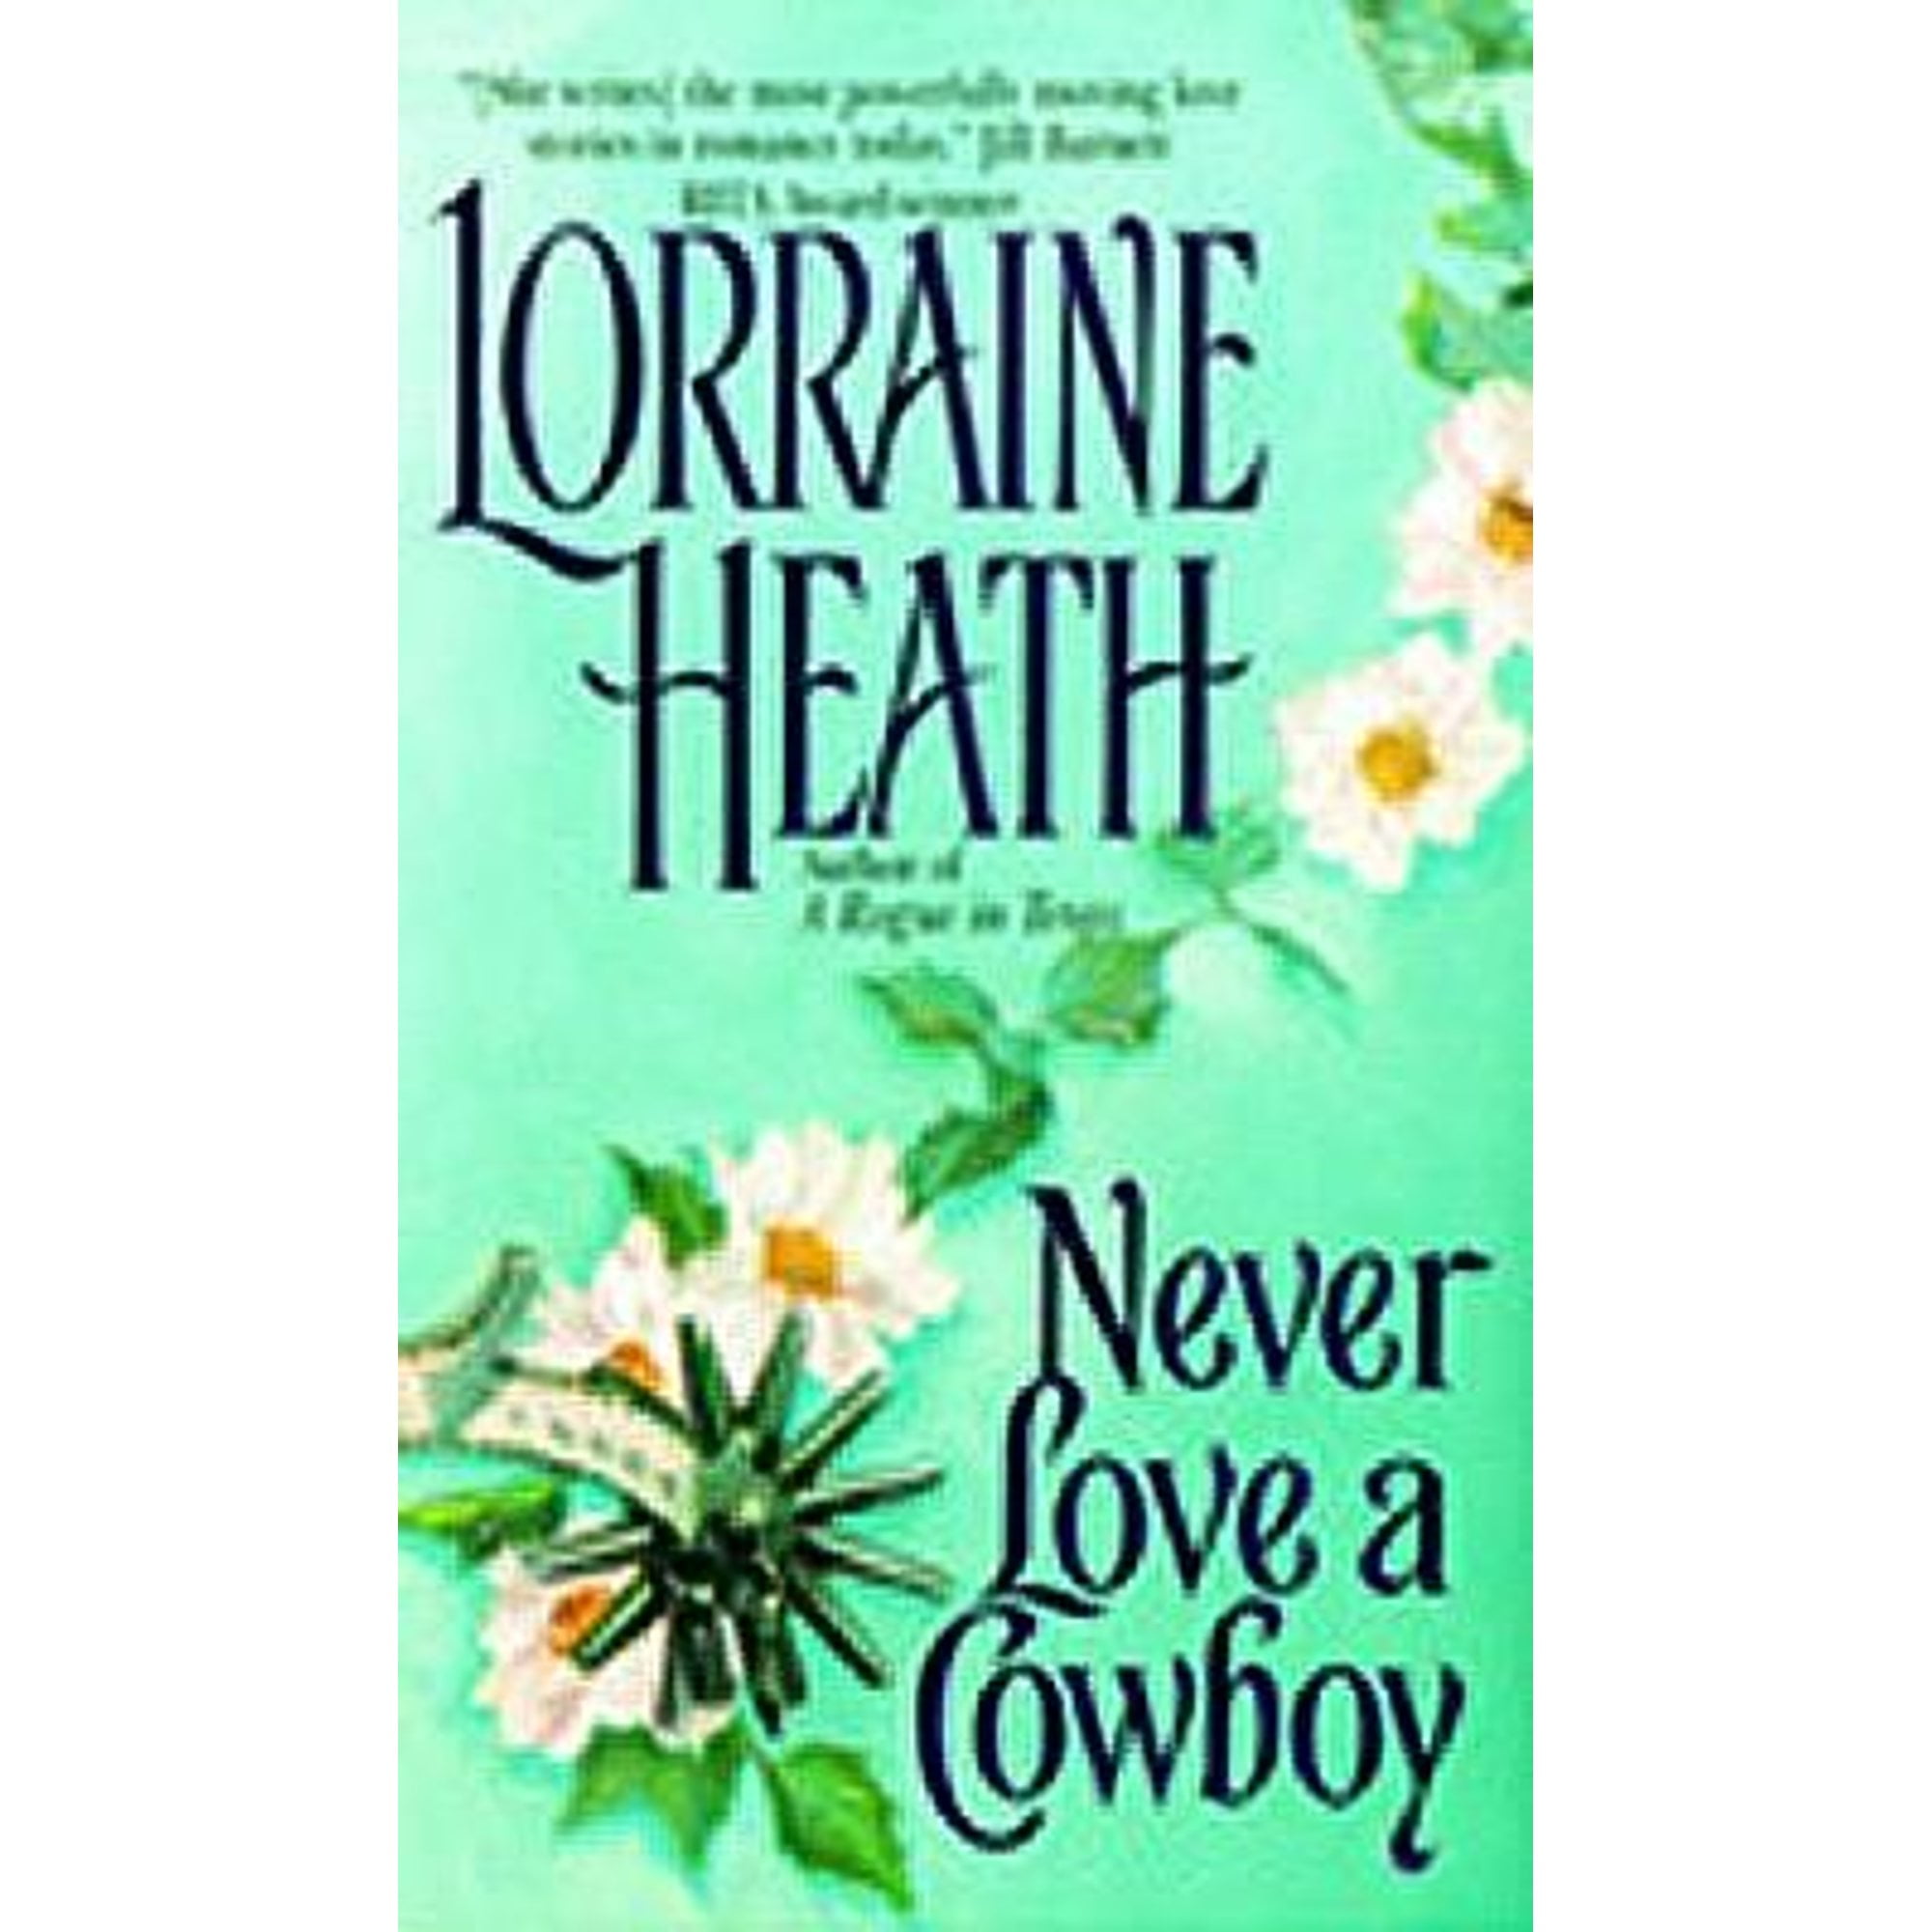 Pre-Owned Never Love a Cowboy (Paperback 9780380803309) by Lorraine Heath